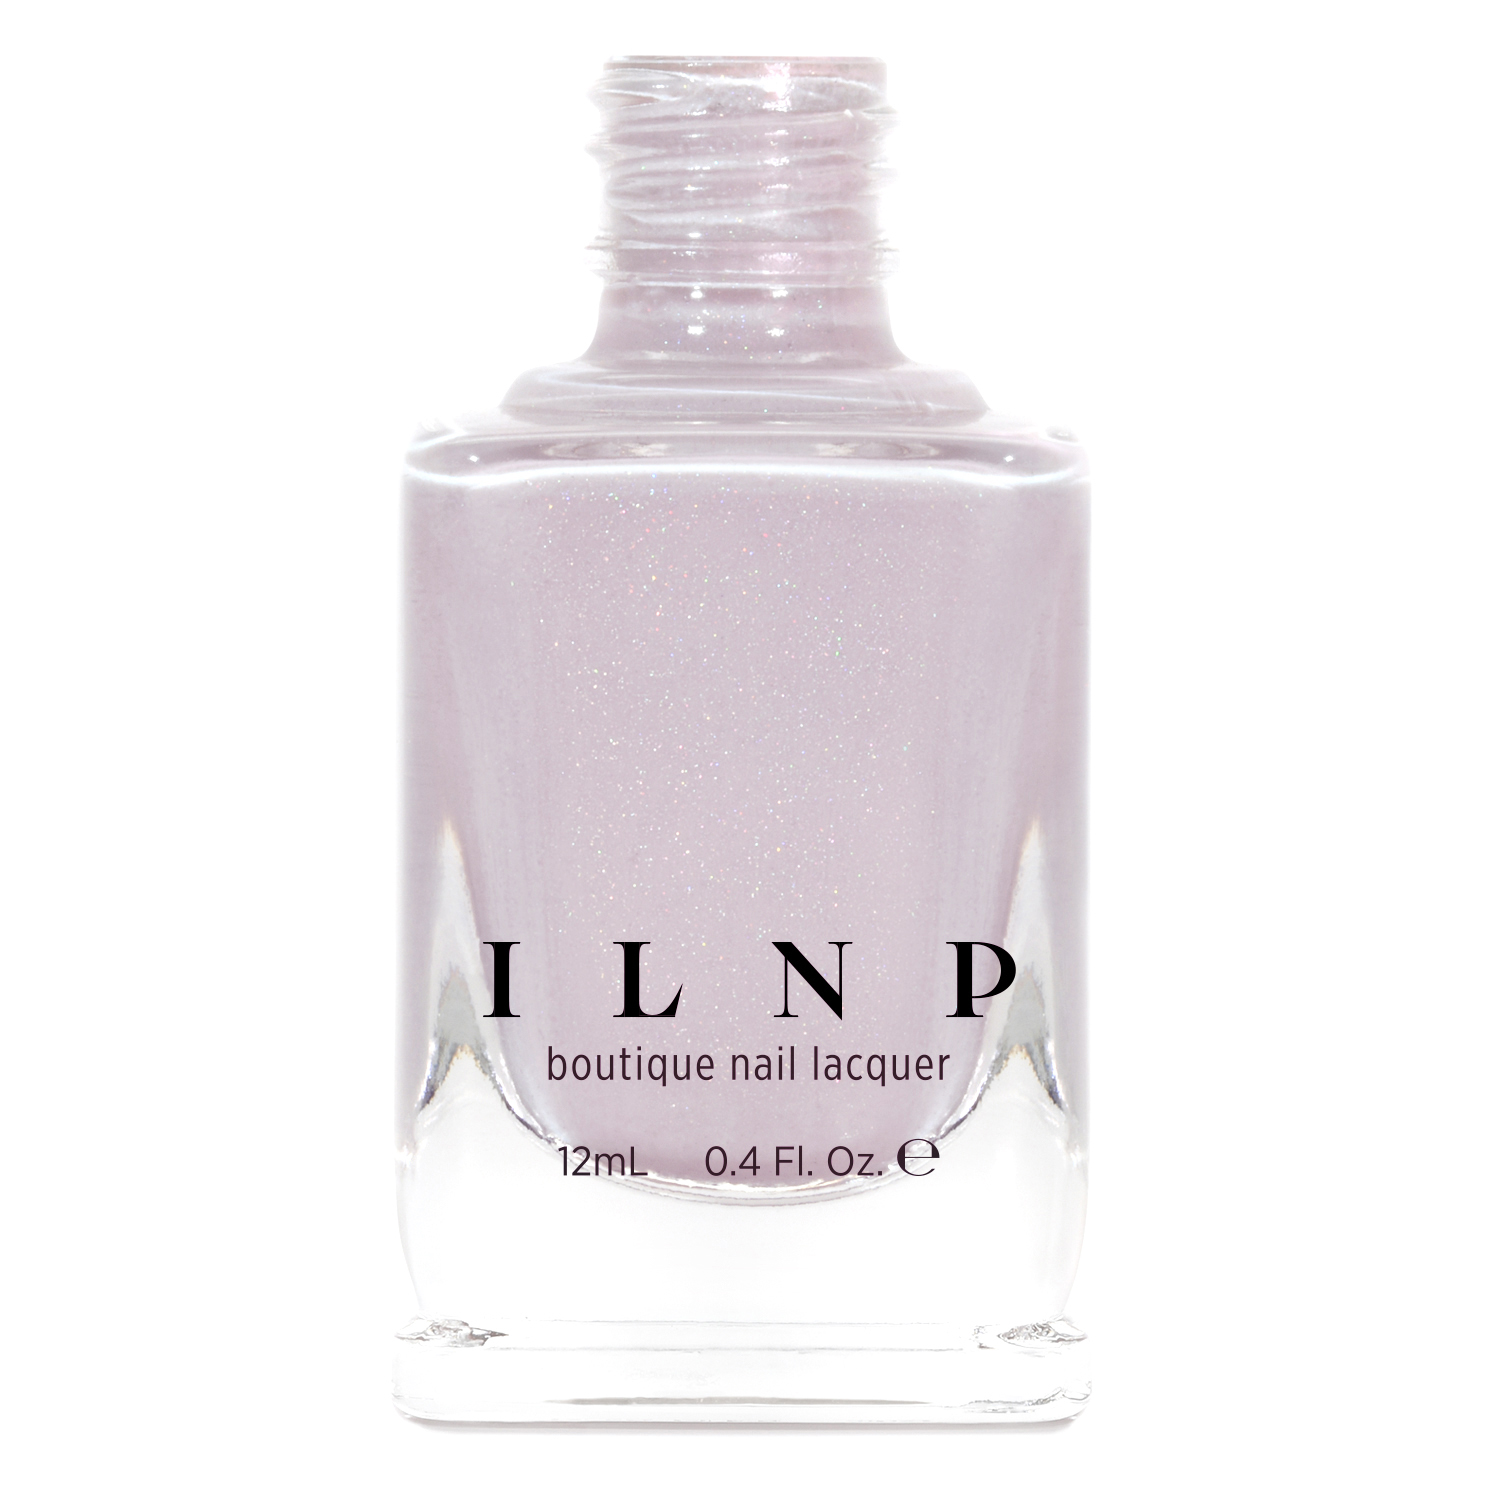 Vanish - Creamy Dusty Lilac Holographic Nail Polish by ILNP